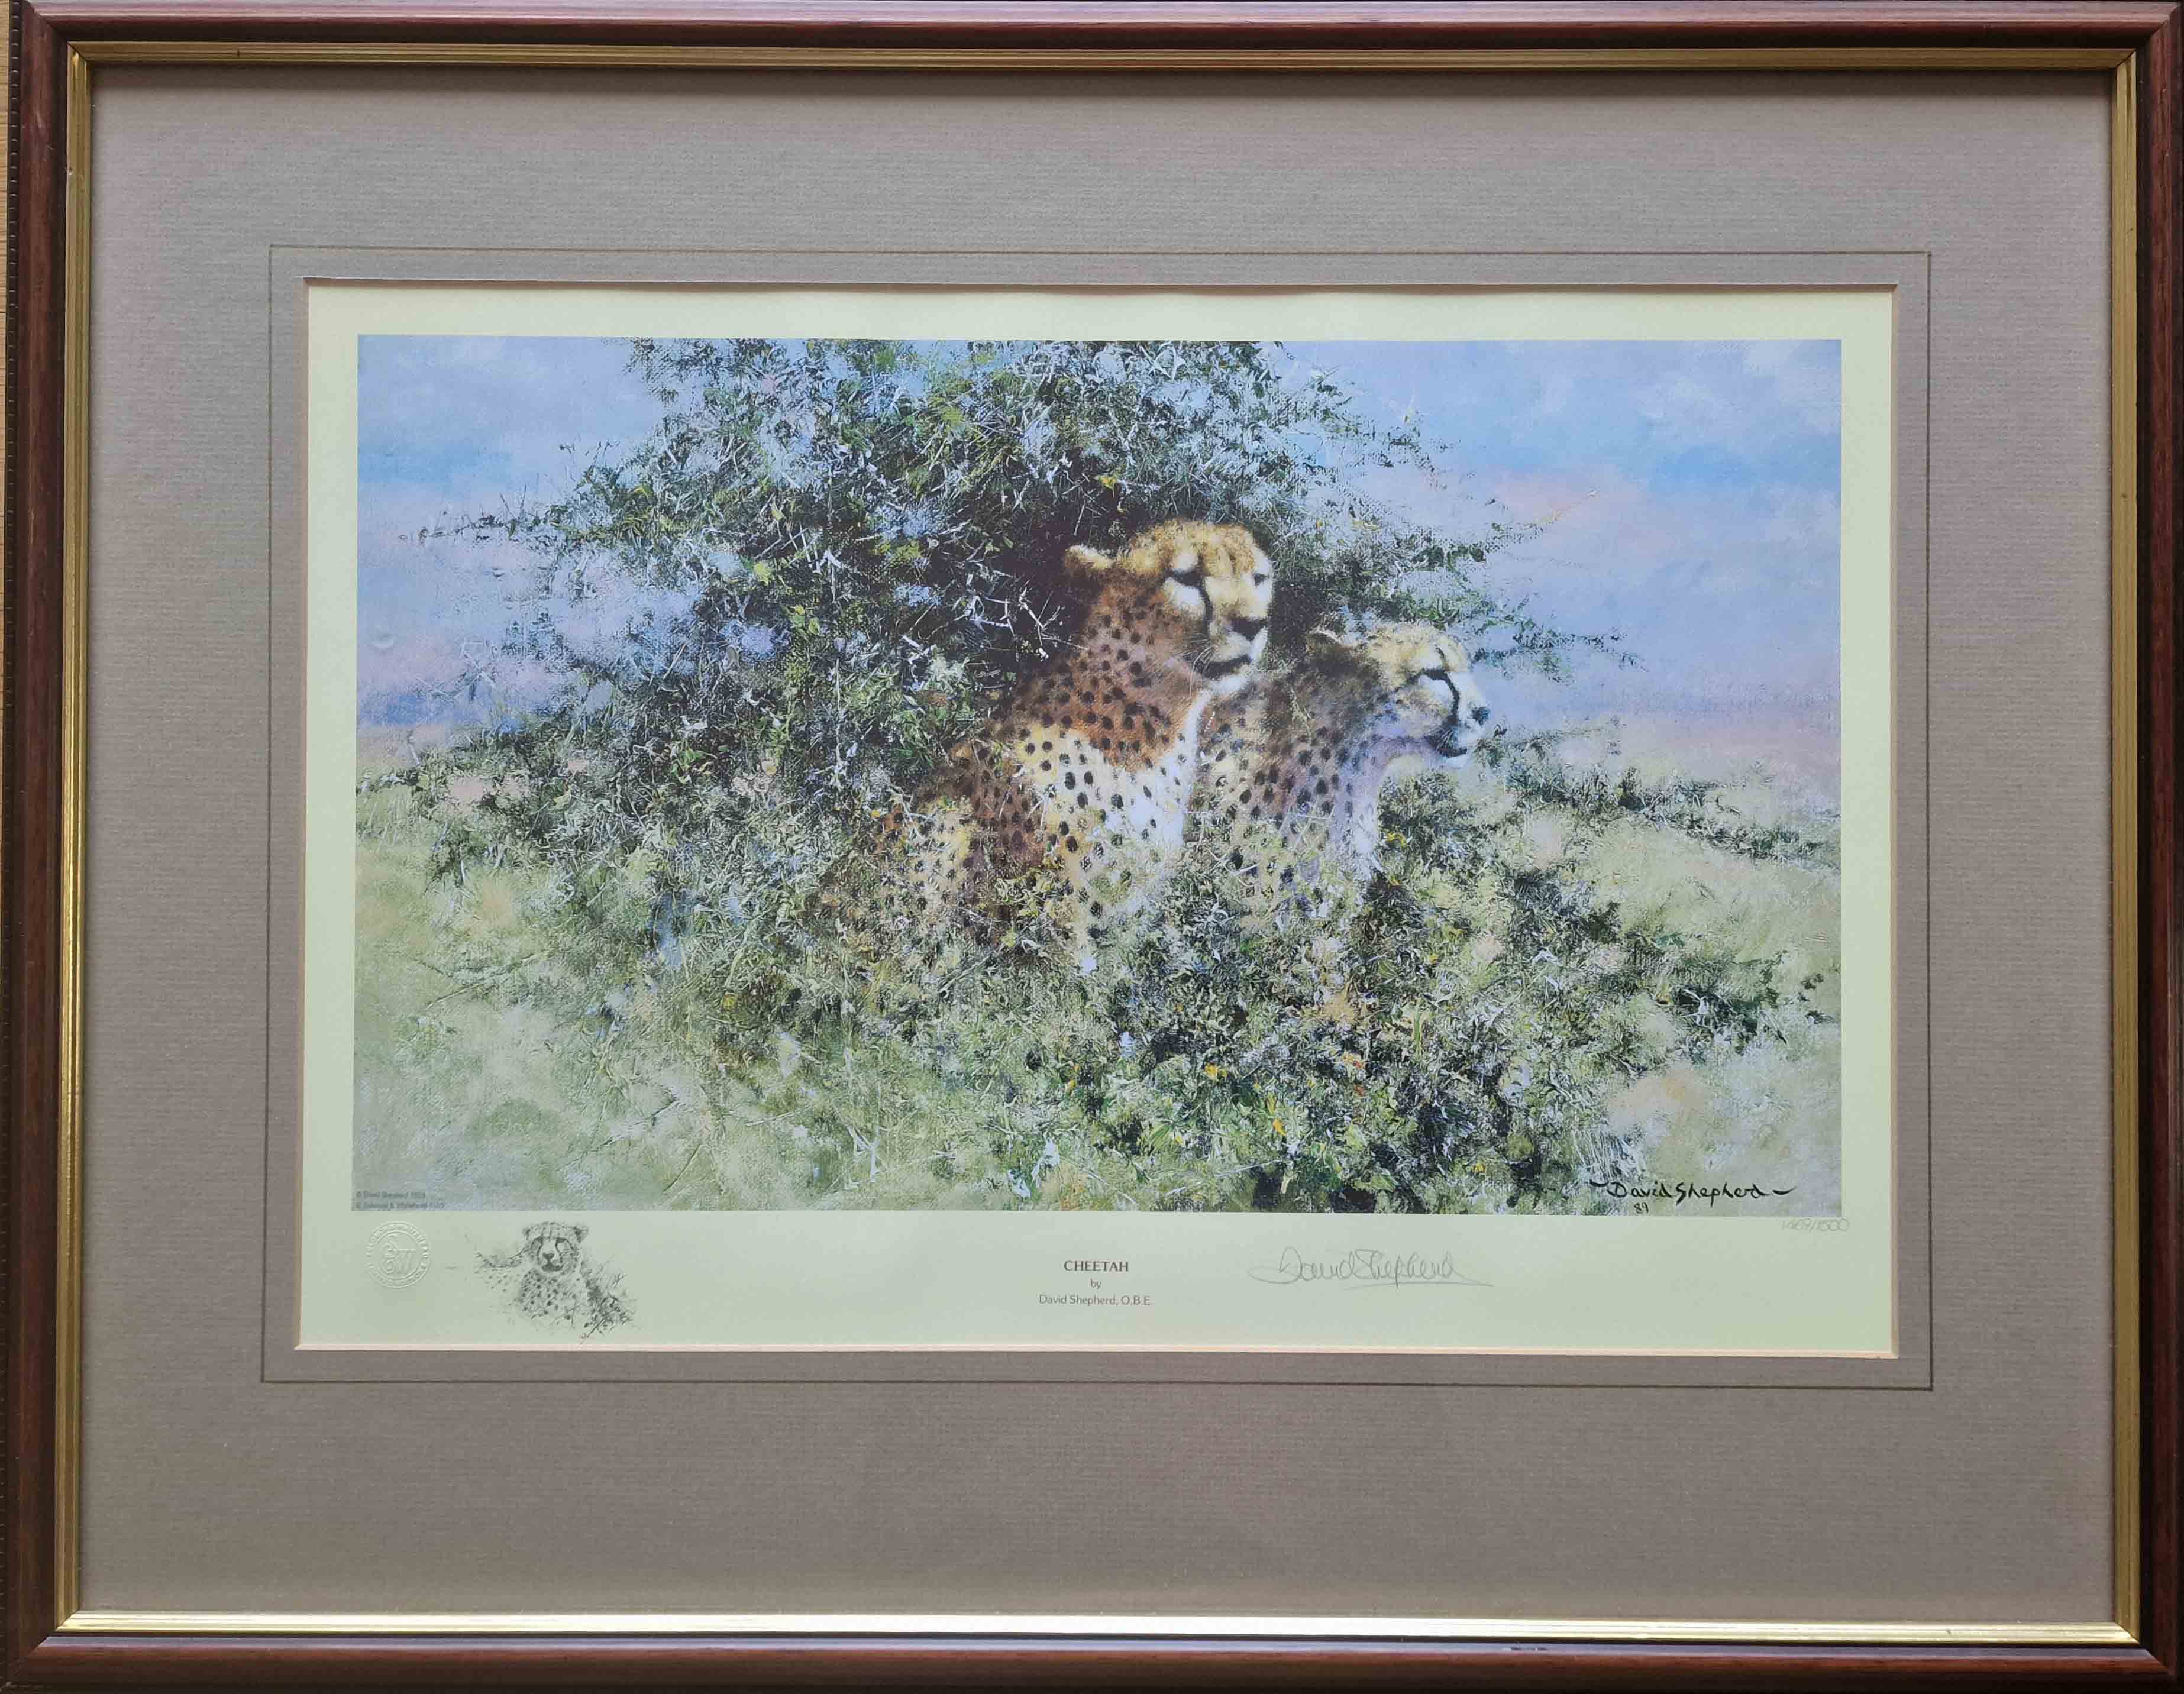 signed limited edition print Cheetahs, framed